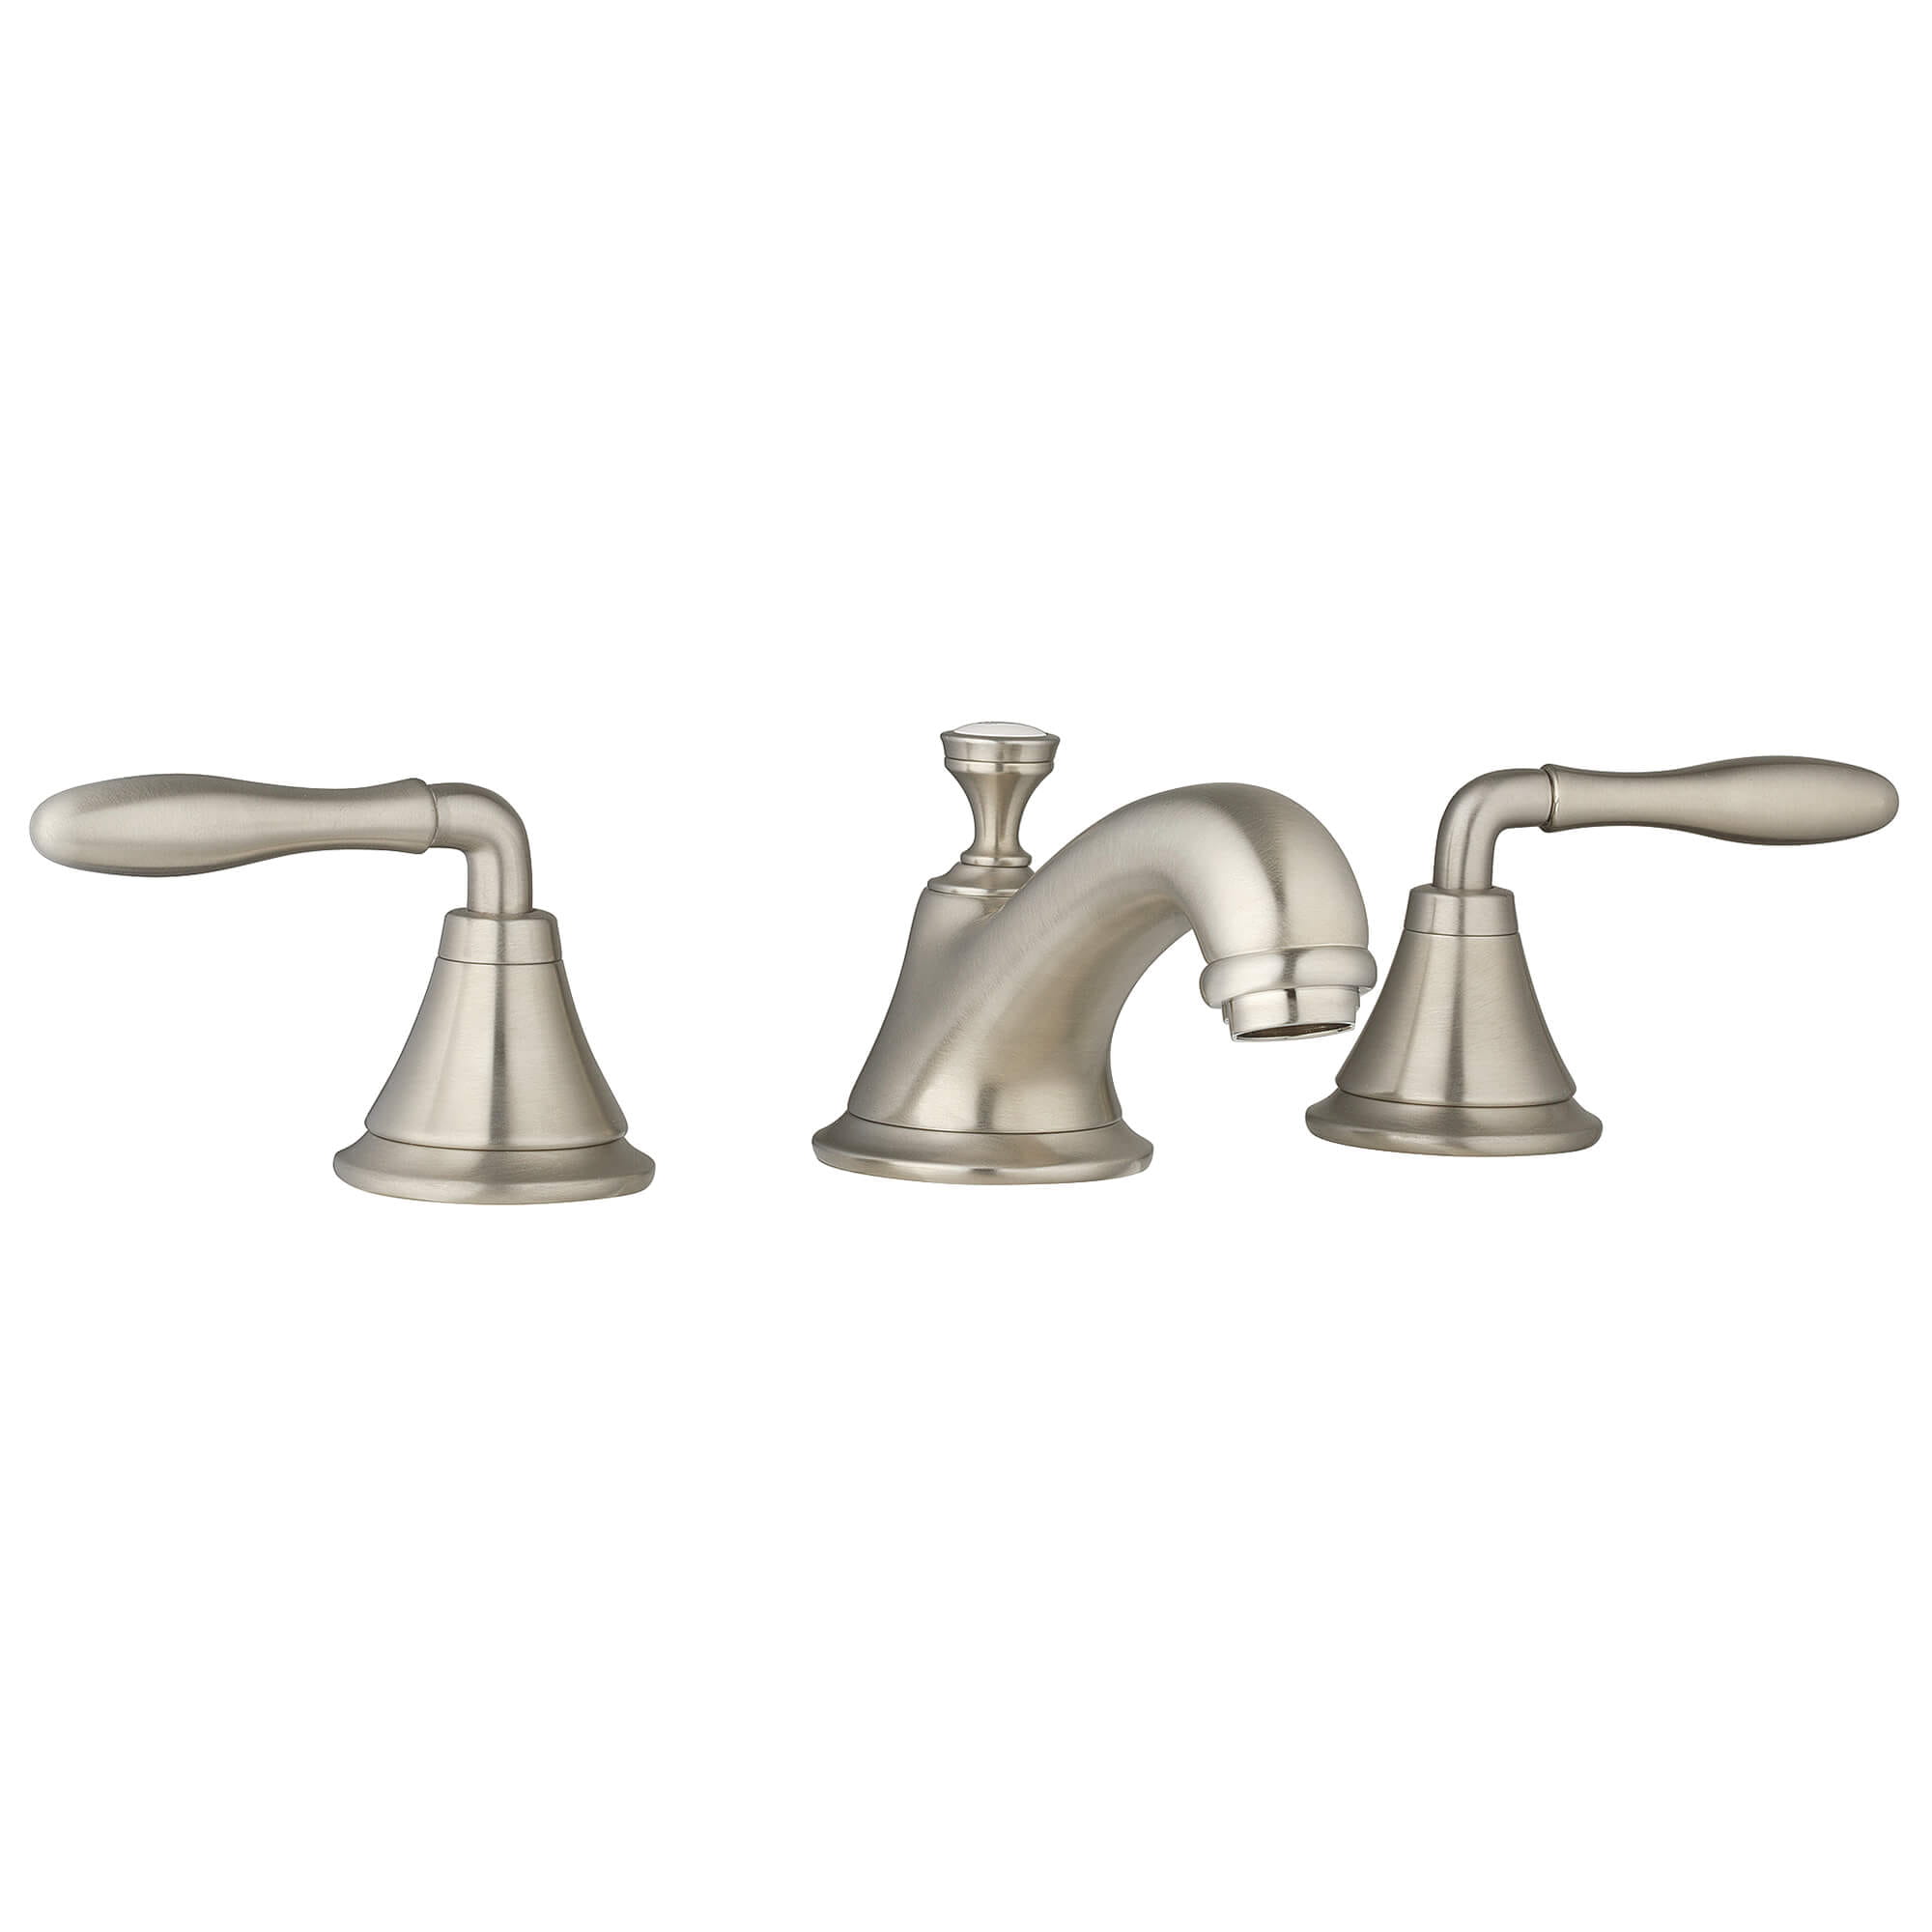 Seabury Manette leviers la paire GROHE BRUSHED NICKEL